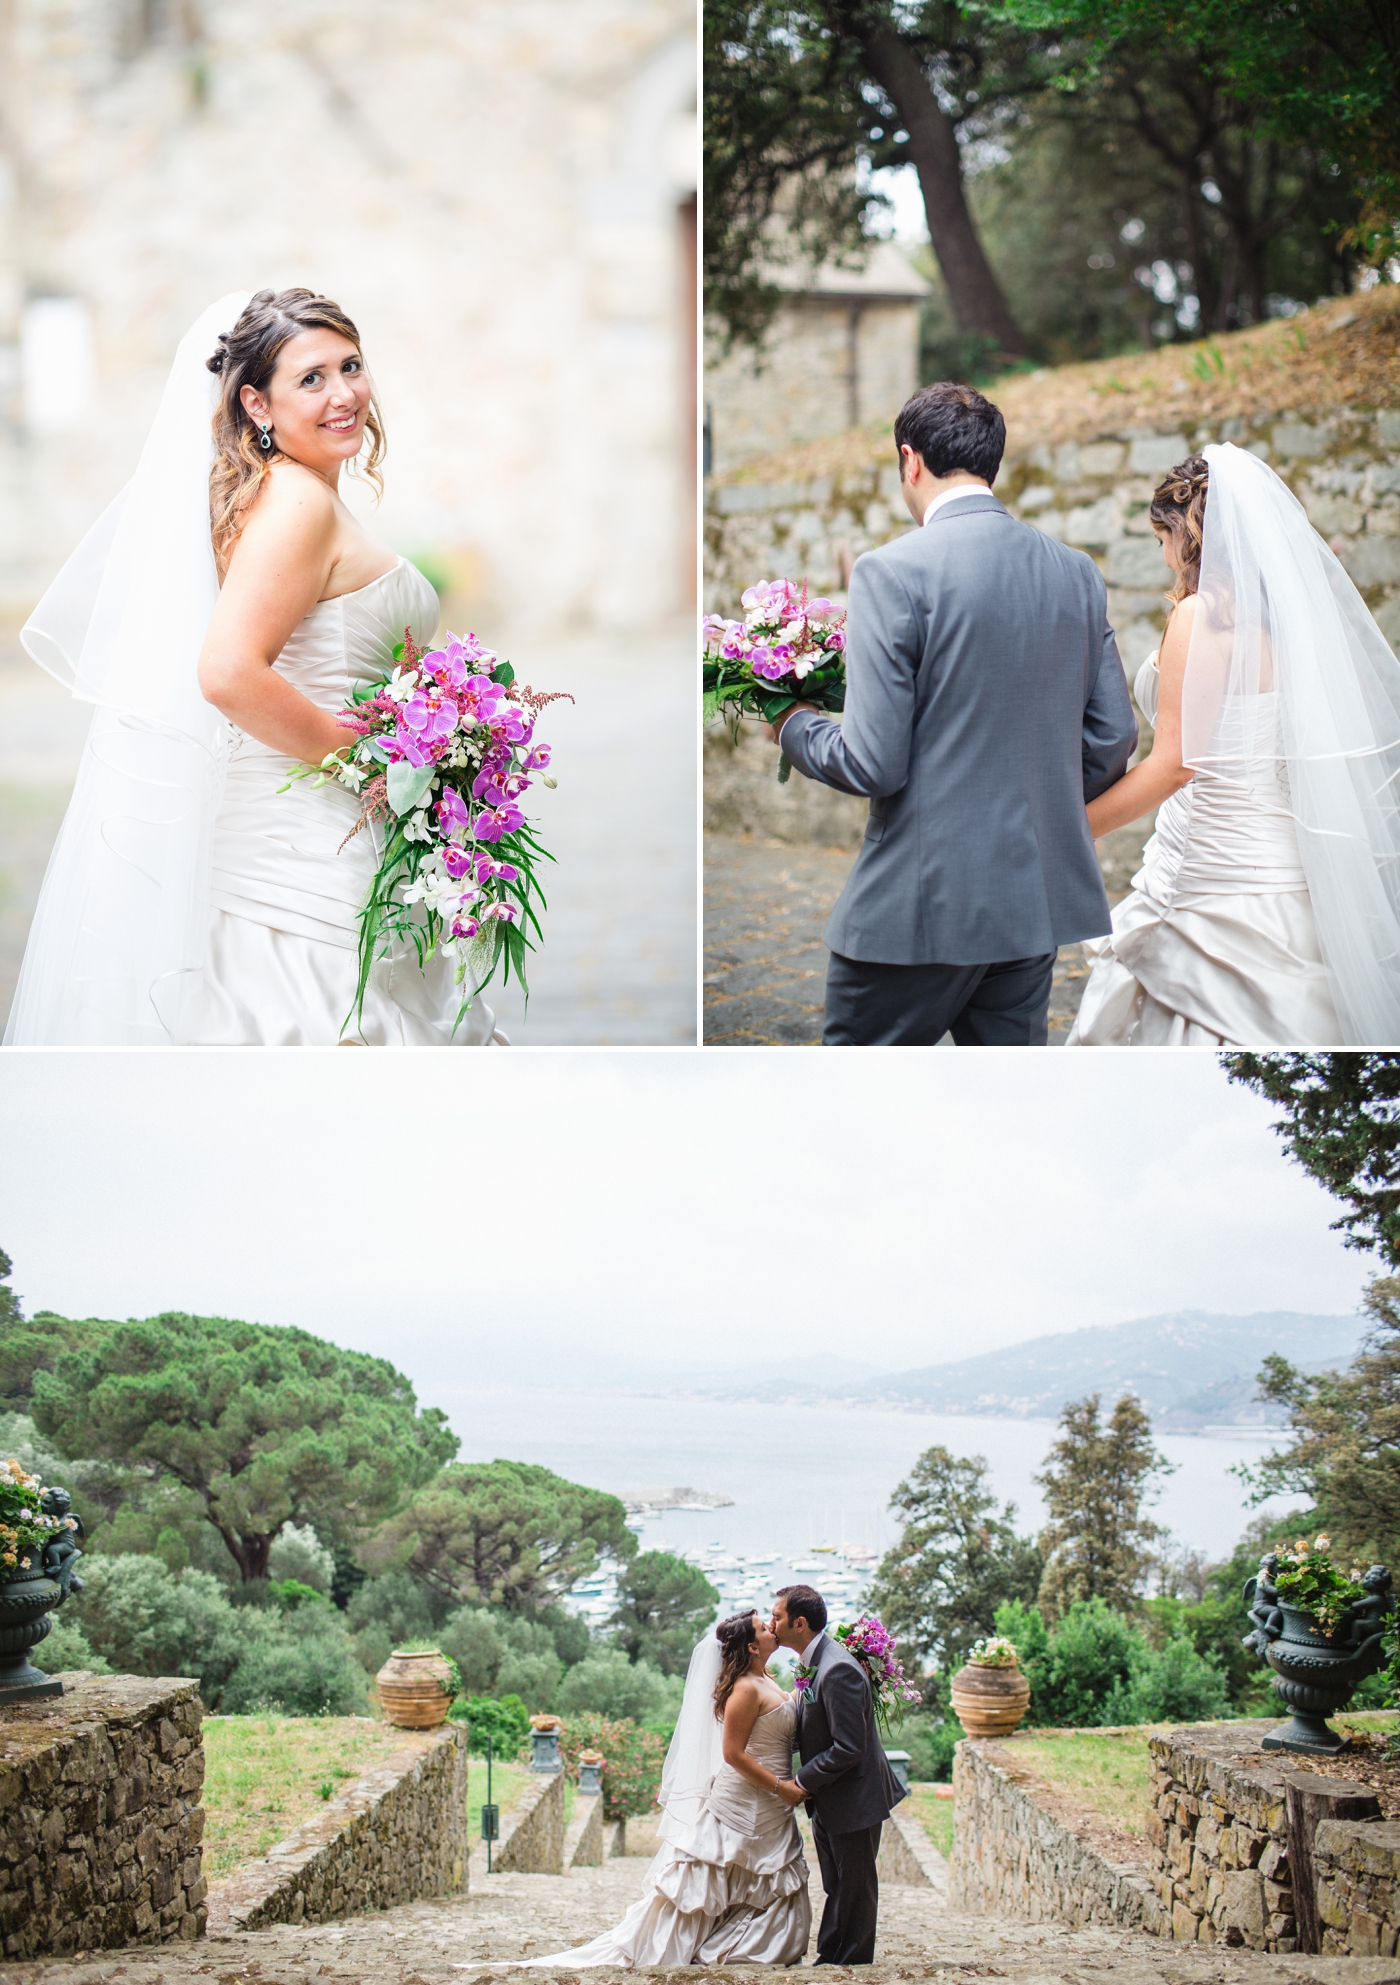 Plan you Perfectly Packaged Italian Destination Wedding Today!